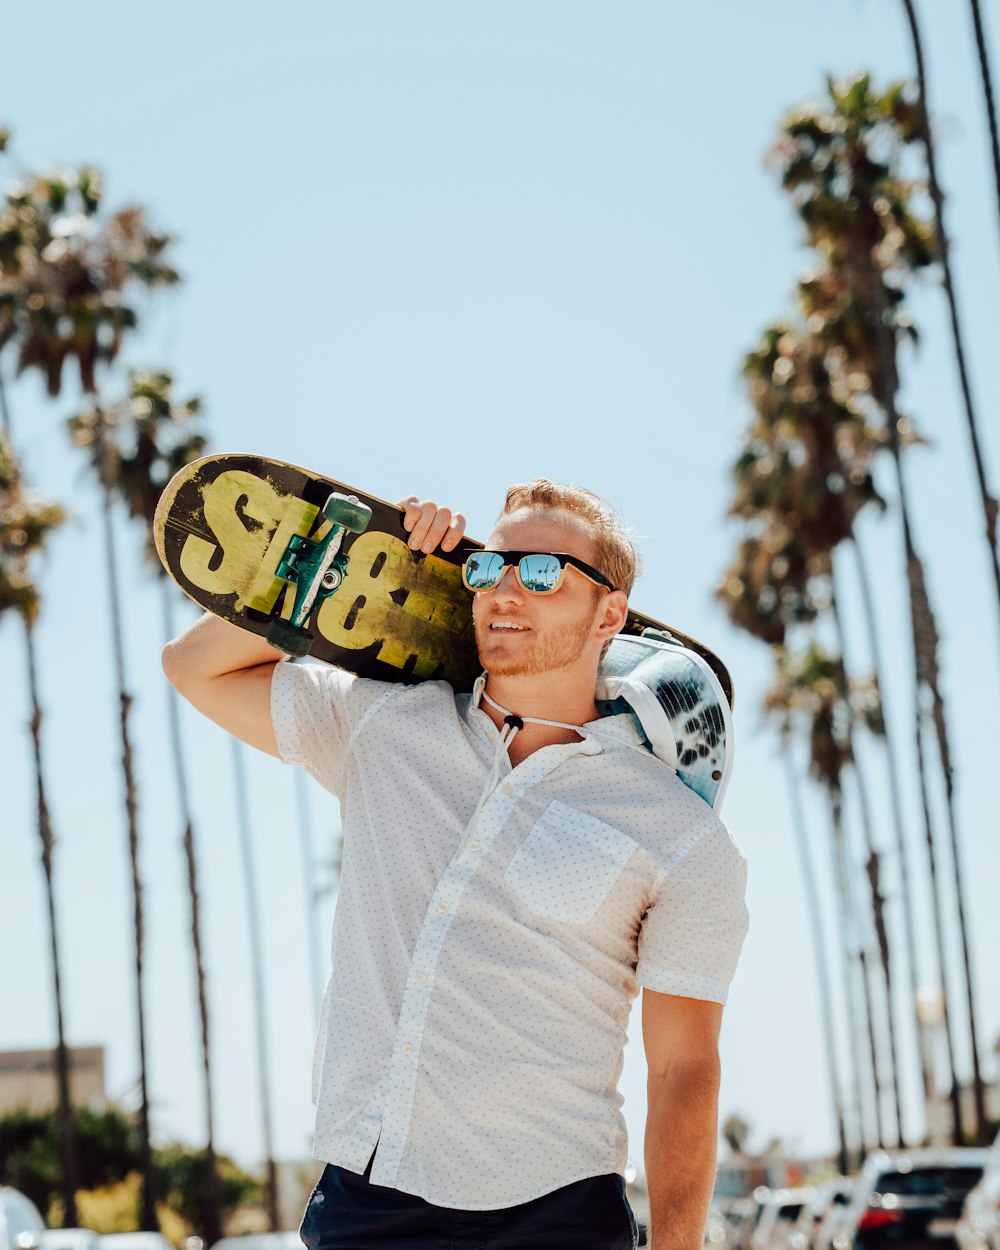 a man holding a skateboard in front of palm trees